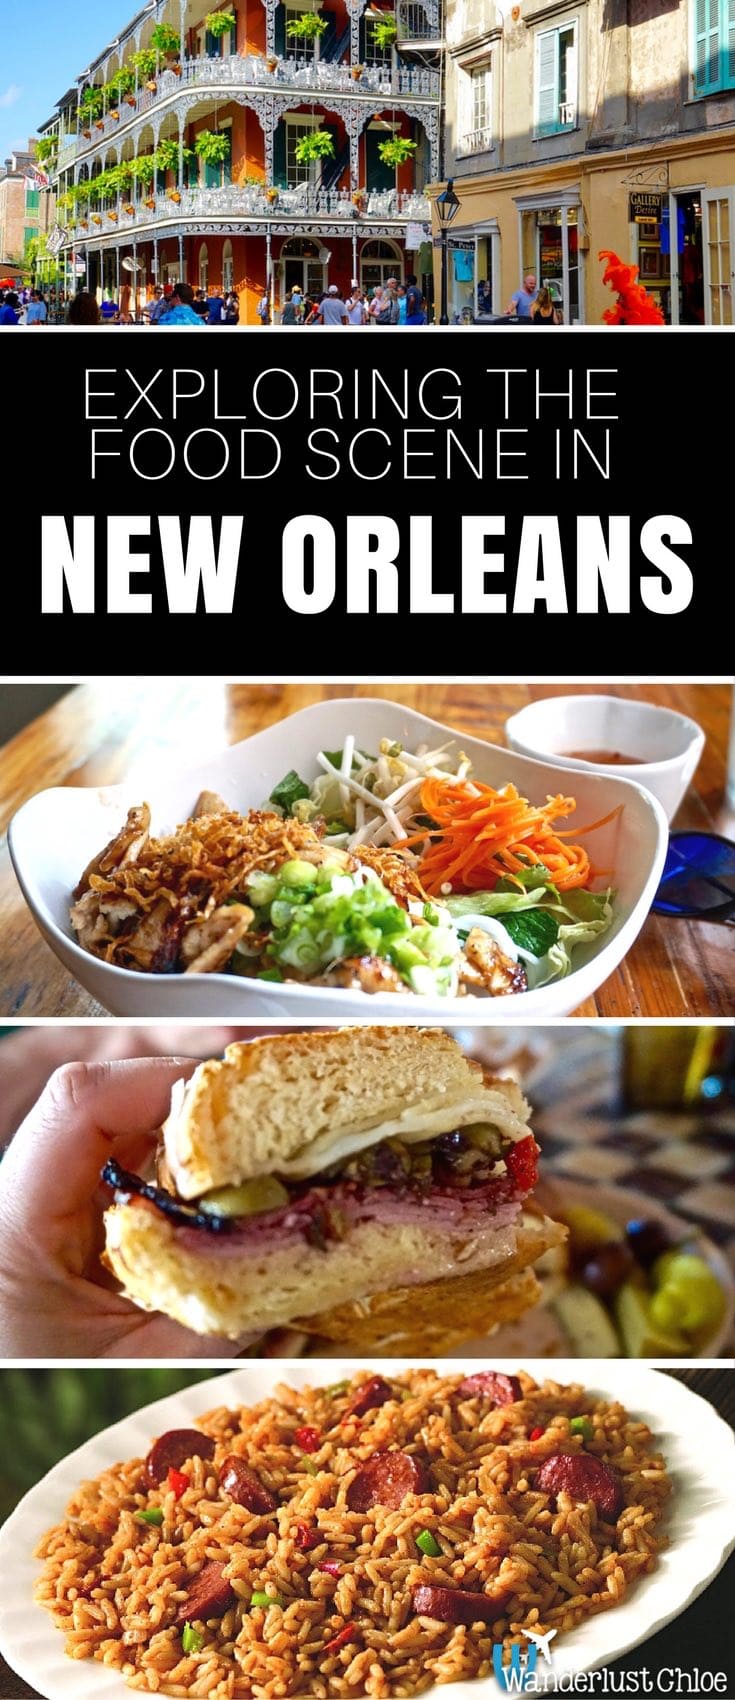 Foods To Try In New Orleans In 2021: Food Guide To The French Quarter